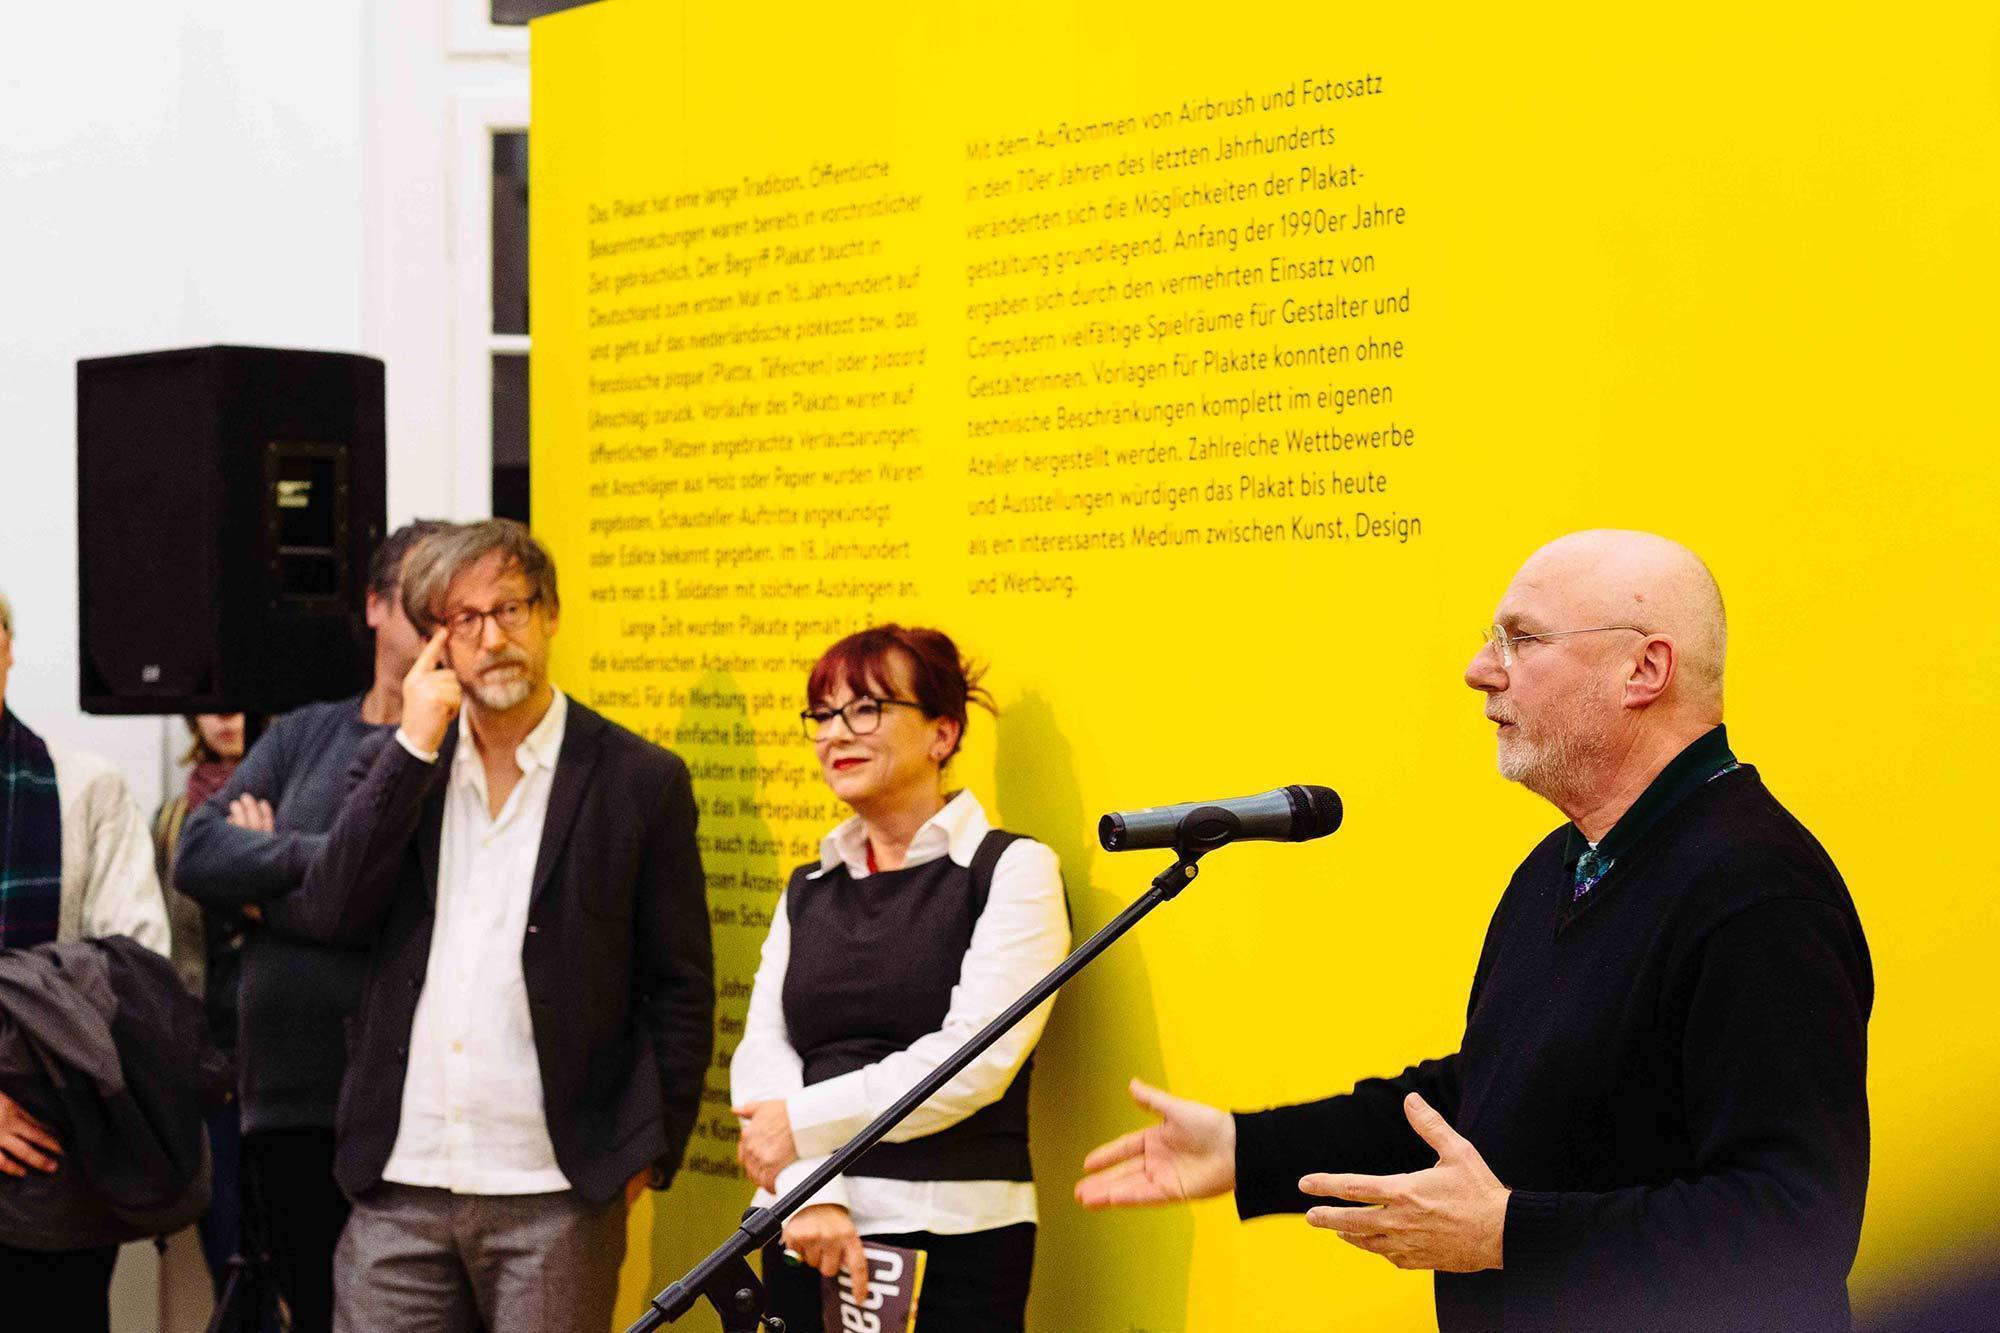 At the opening of the exhibition Dieter Hofmann, head of the design school, Anna Berkenbusch, curator of the show and jury-member Bernard Stein (f.l.t.r.) directed some words to the visitors.
